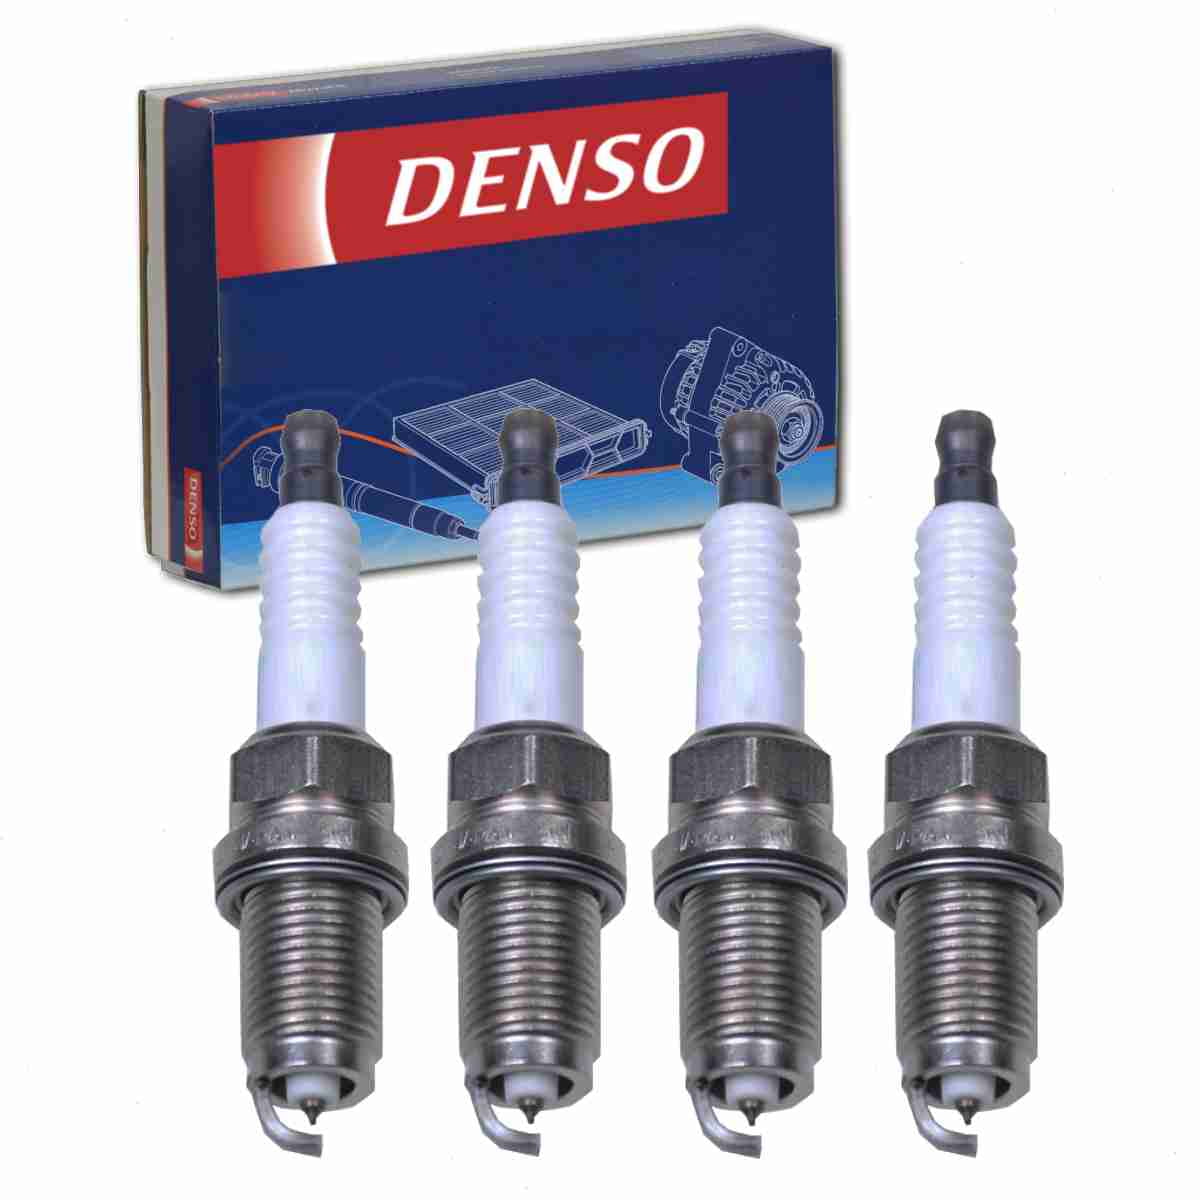 4 pc DENSO 3432 Spark Plugs for 12290-PND-A01 9807B-561-7W 9807B-561-BW  9807B-561-CW SKJ20DR-M11S Ignition Wire Secondary Fits select: 2006-2009  HONDA 